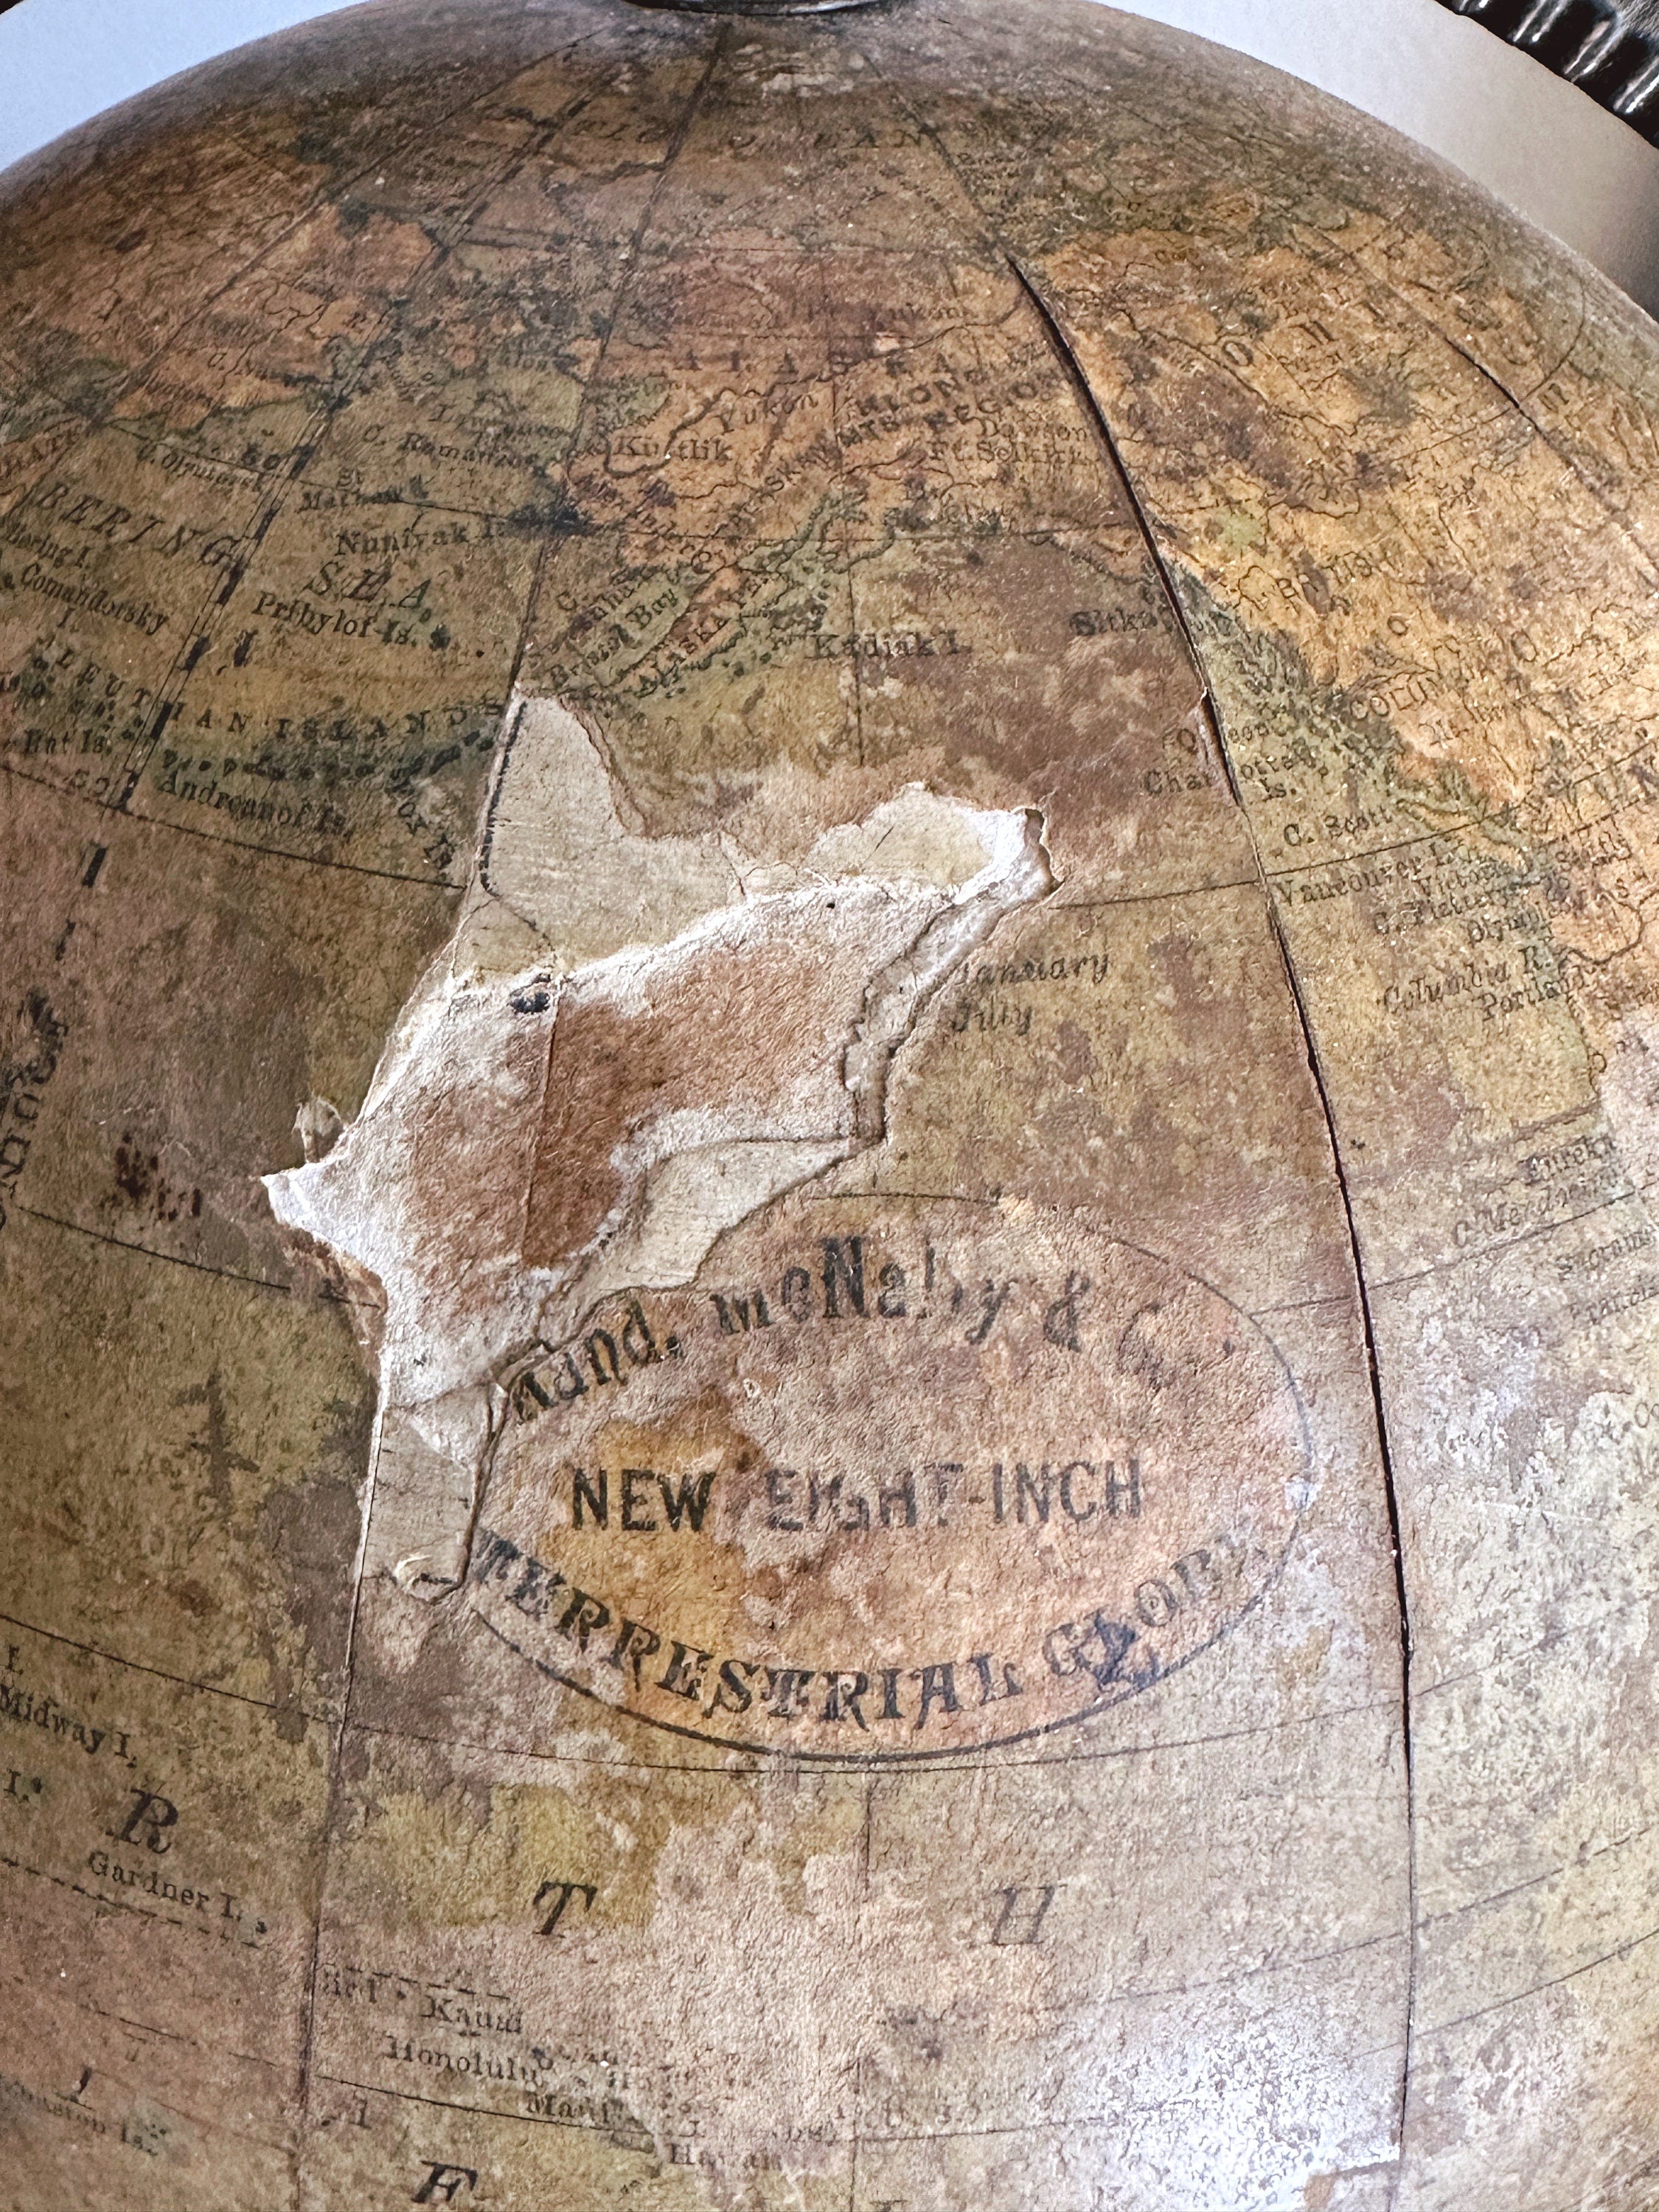 Antique Rand McNally 1920s 9 Inch Terrestrial World Globe with Cast Iron Clawfoot Base | Historical Cartography Collectors Gift Office Decor